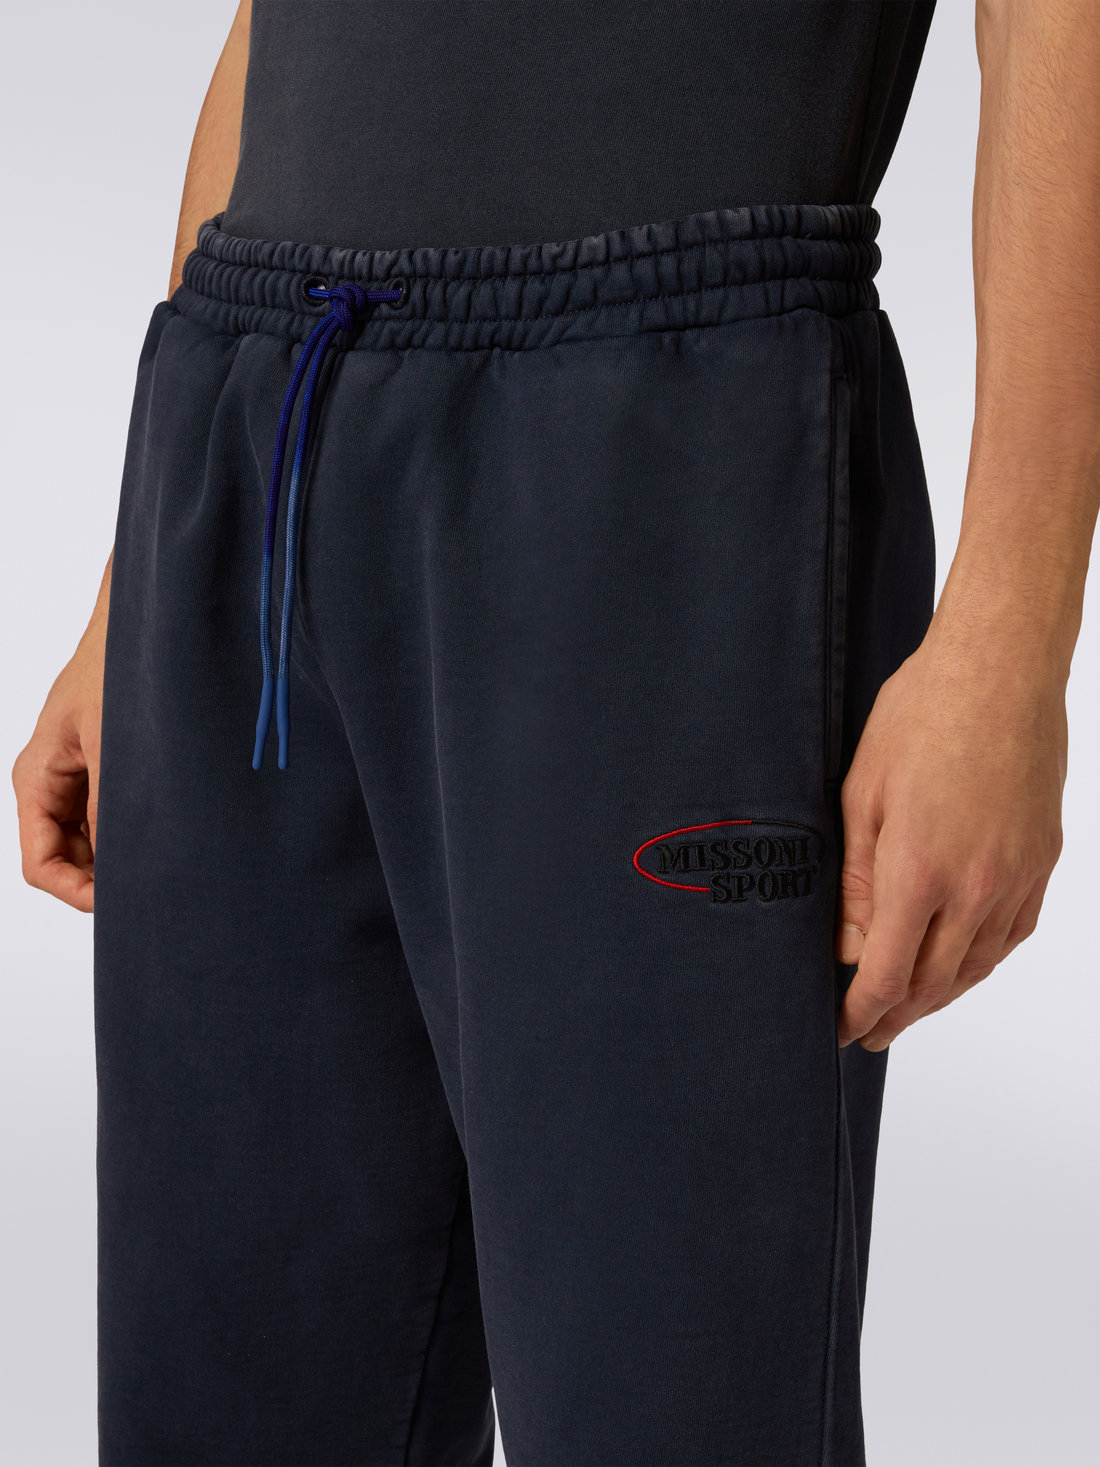 Cotton knit trousers with logo, Blue - TS23WI01BJ00H0S72BL - 4